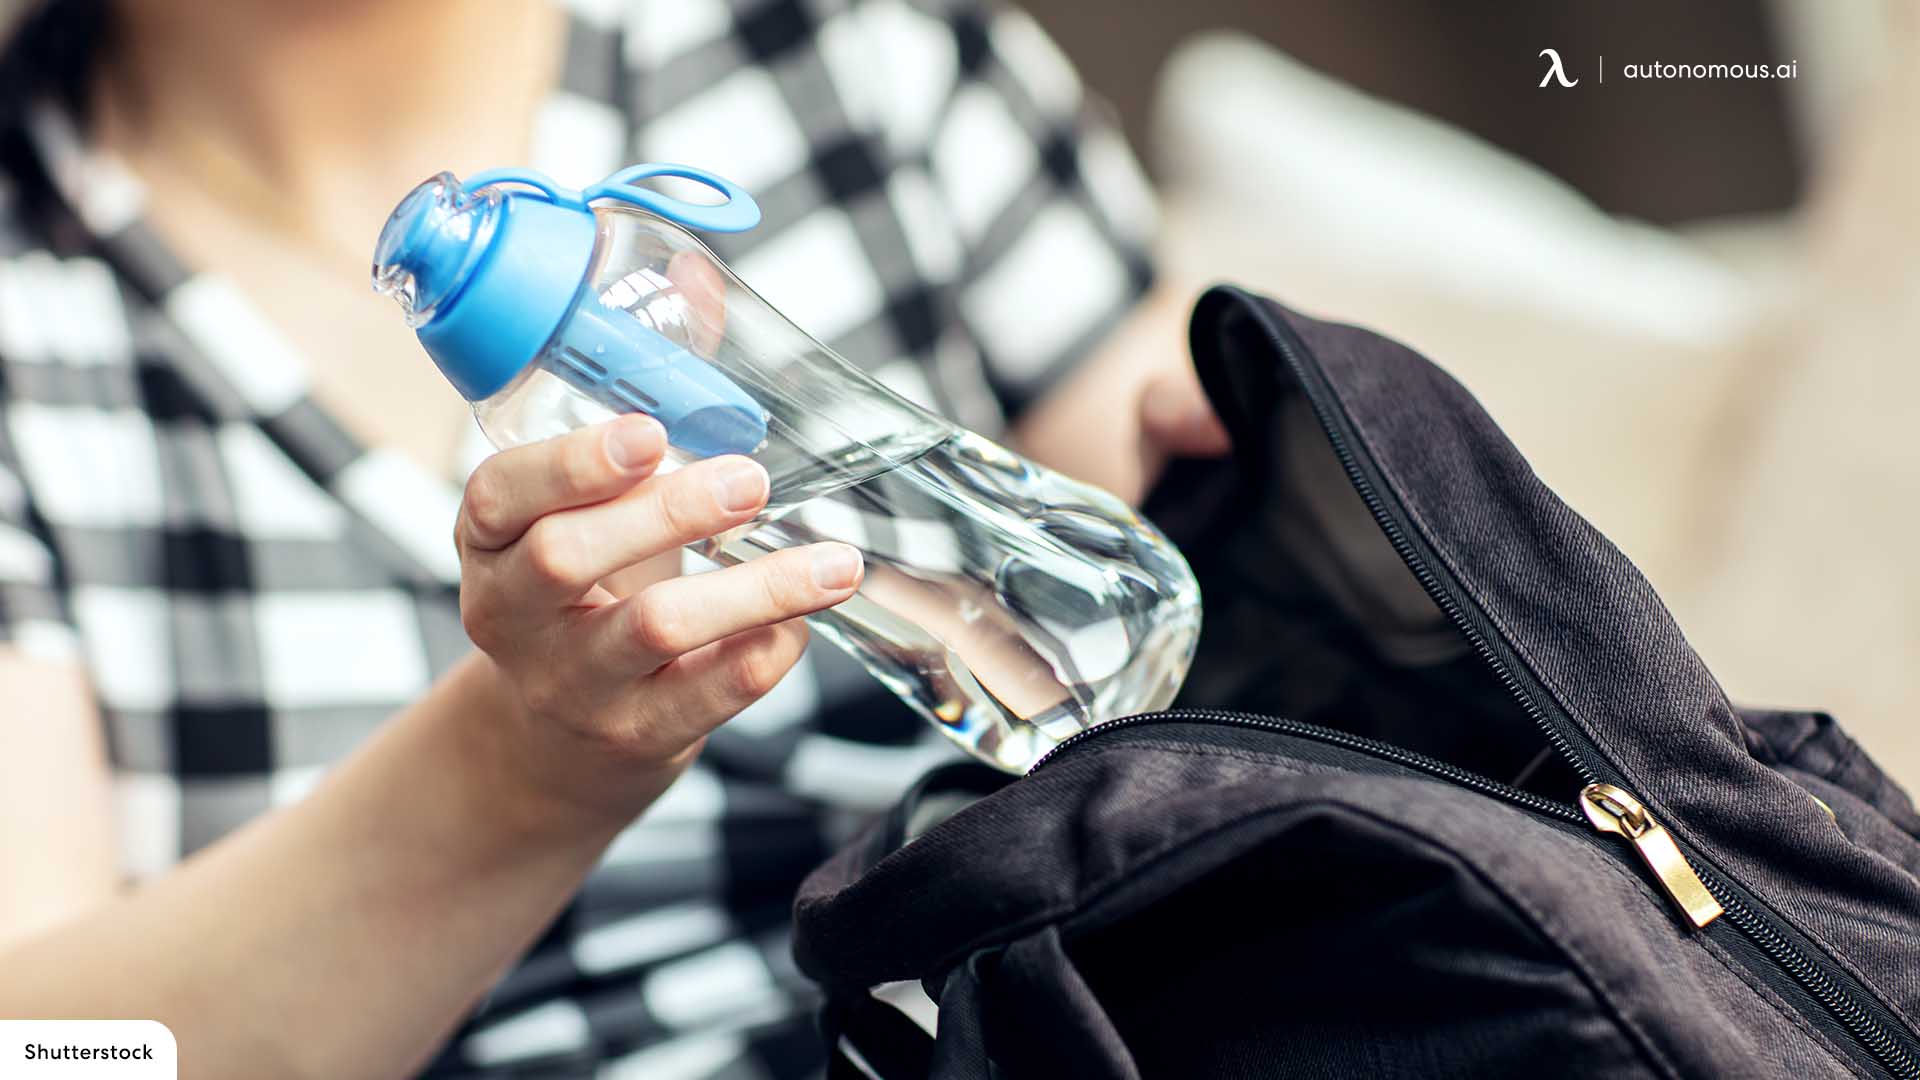 10 Best Filtered Water Bottles for Travel & Hiking (2022 Review)